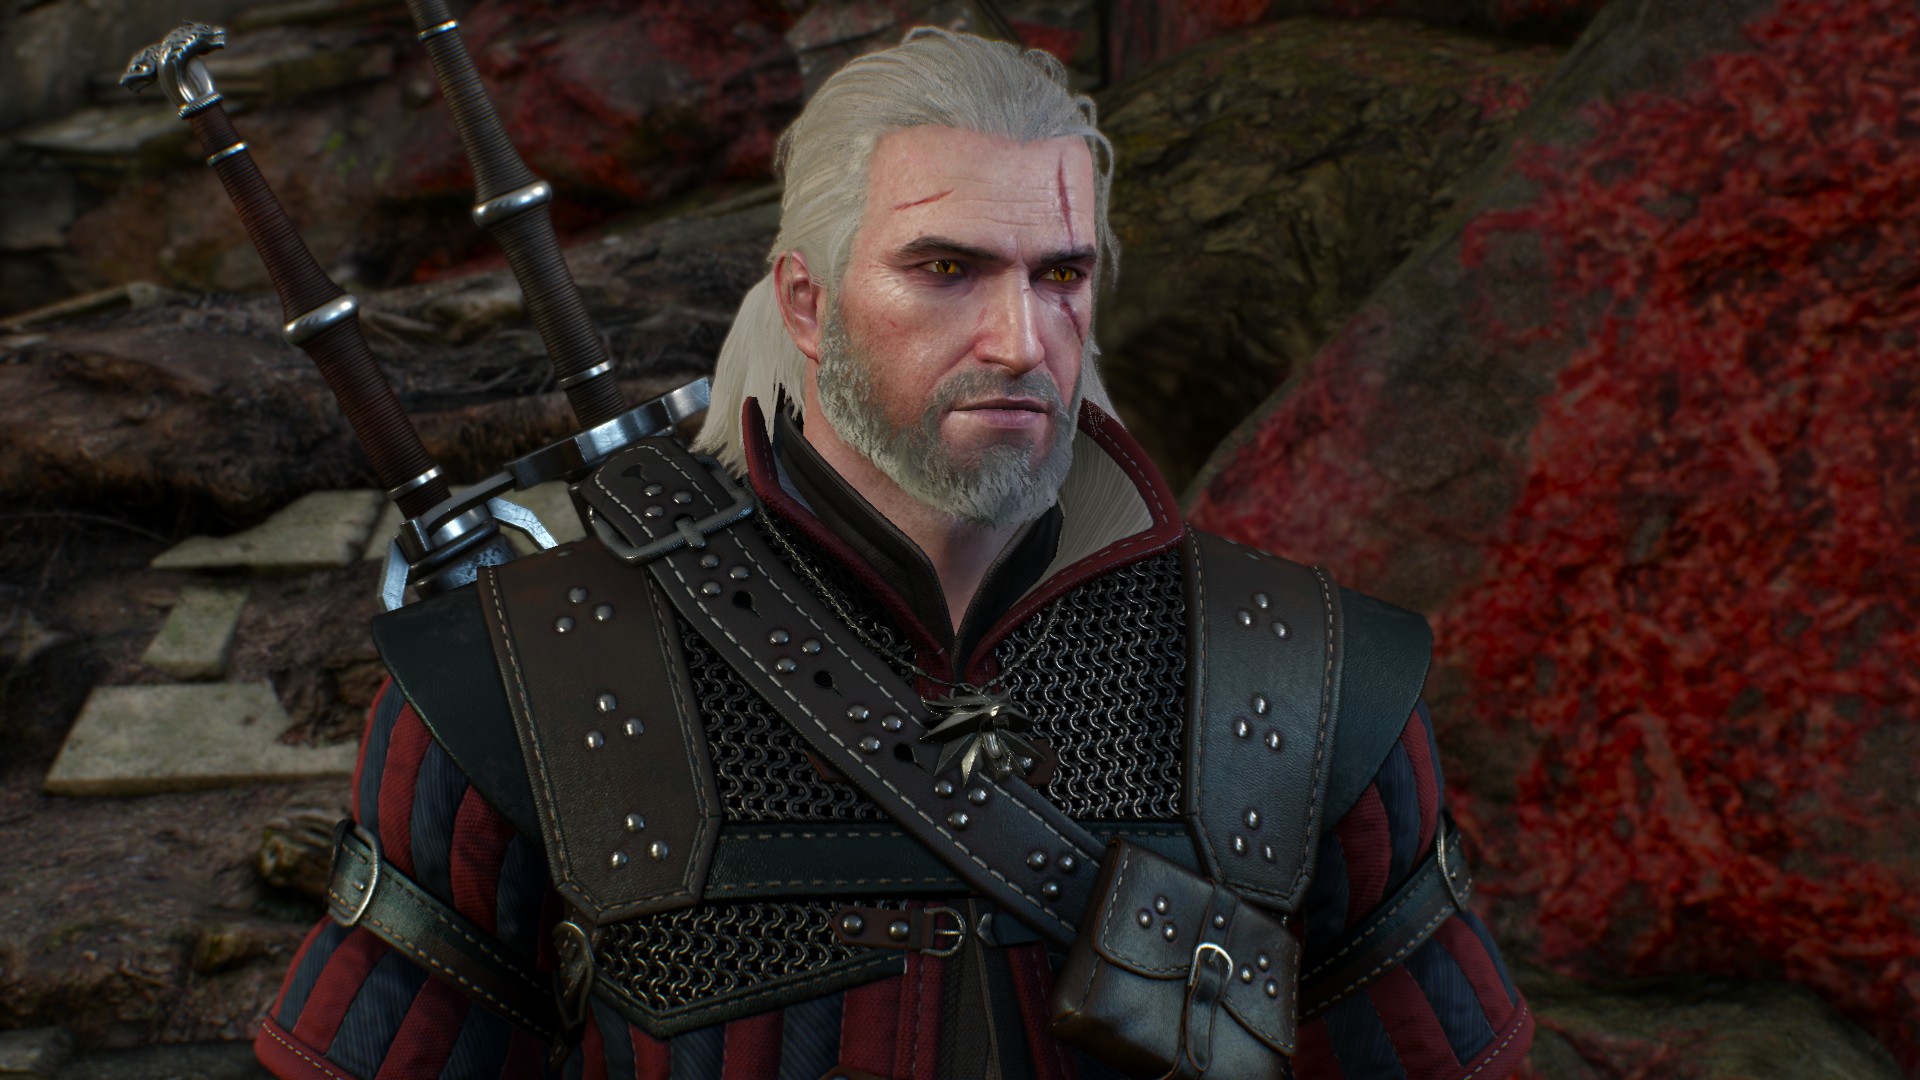 General 1920x1080 Geralt of Rivia The Witcher 3: Wild Hunt sword white hair CD Projekt RED video games video game characters Book characters